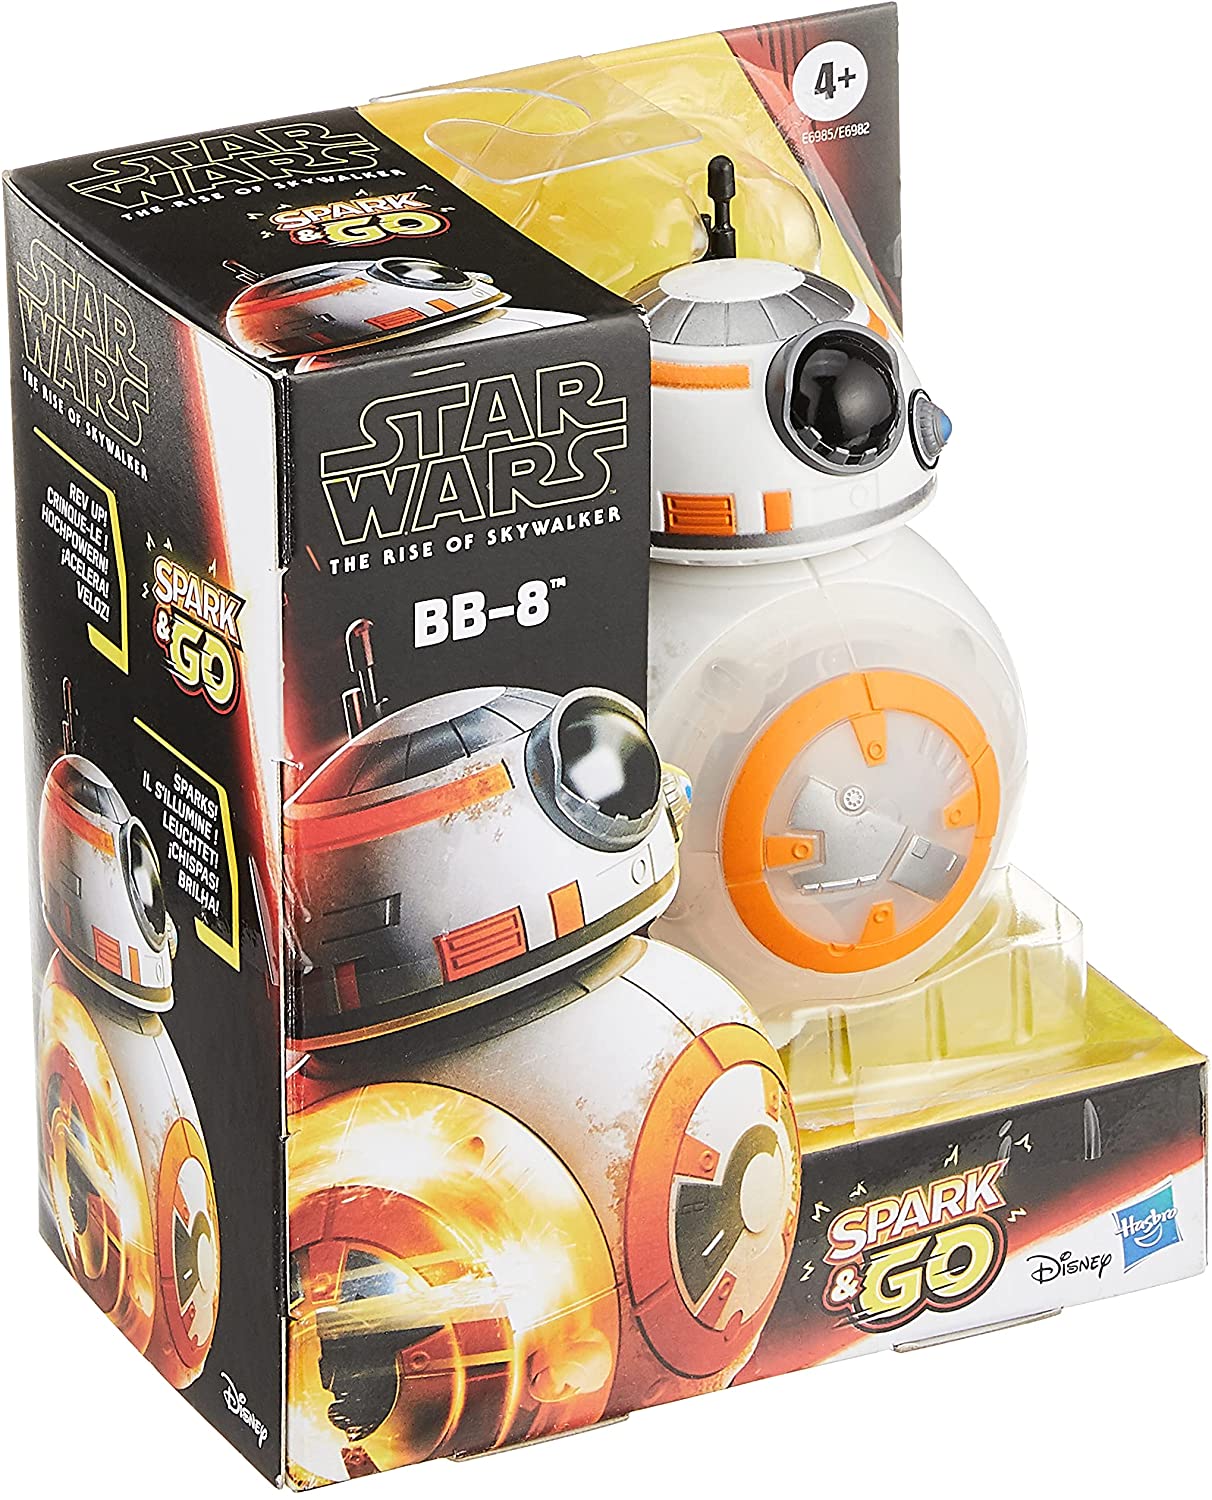 Star Wars Spark Go Bb 8 Rolling Astromech Droid The Rise Of Skywalker Rev Go Sparking Toy Toy 3123